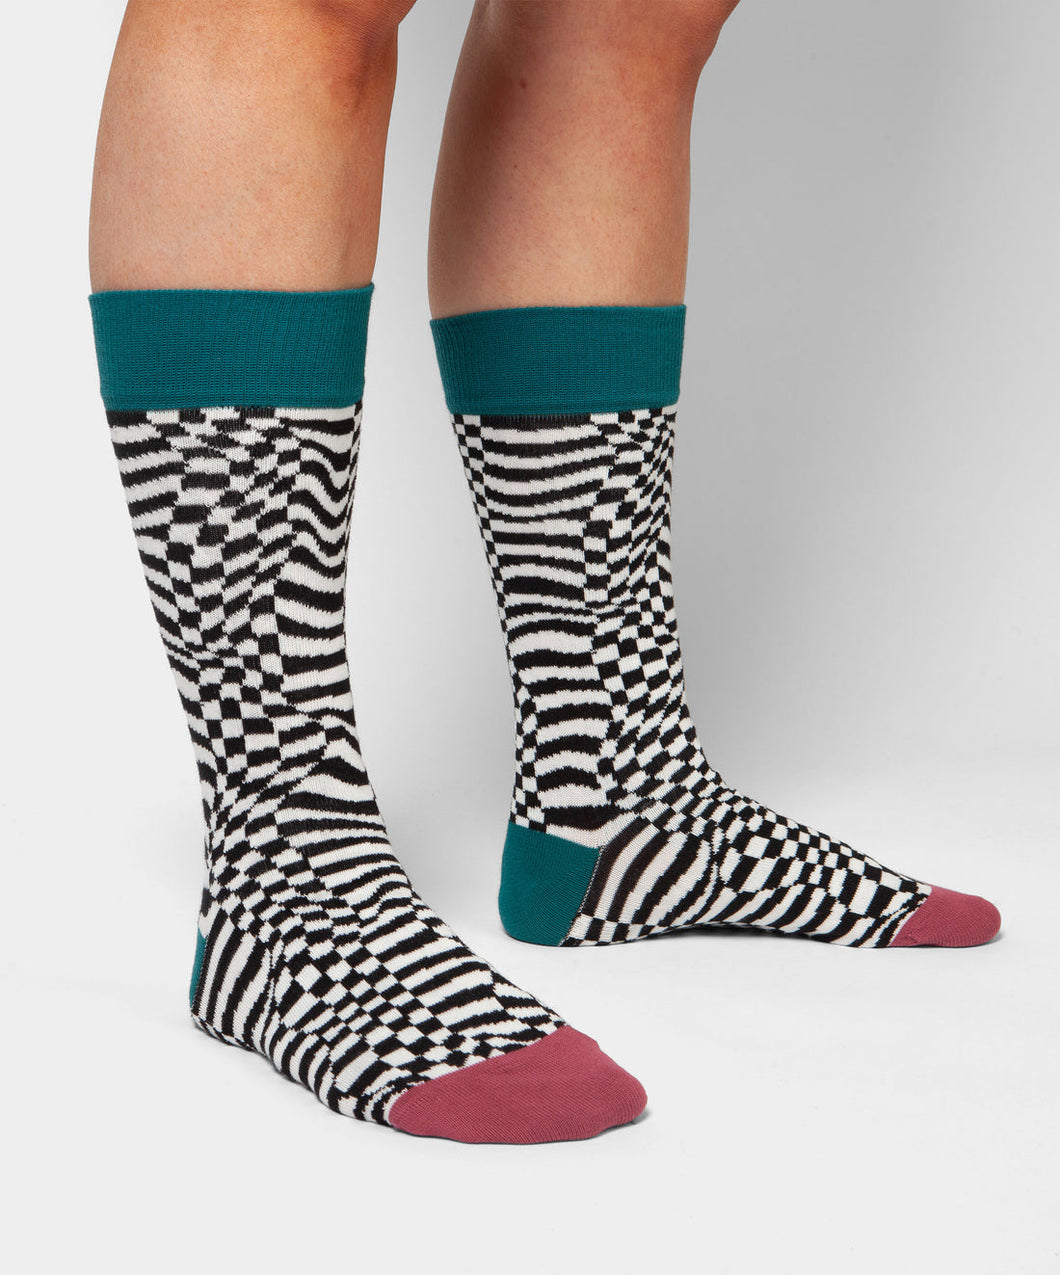 Dilly socks Calcetines